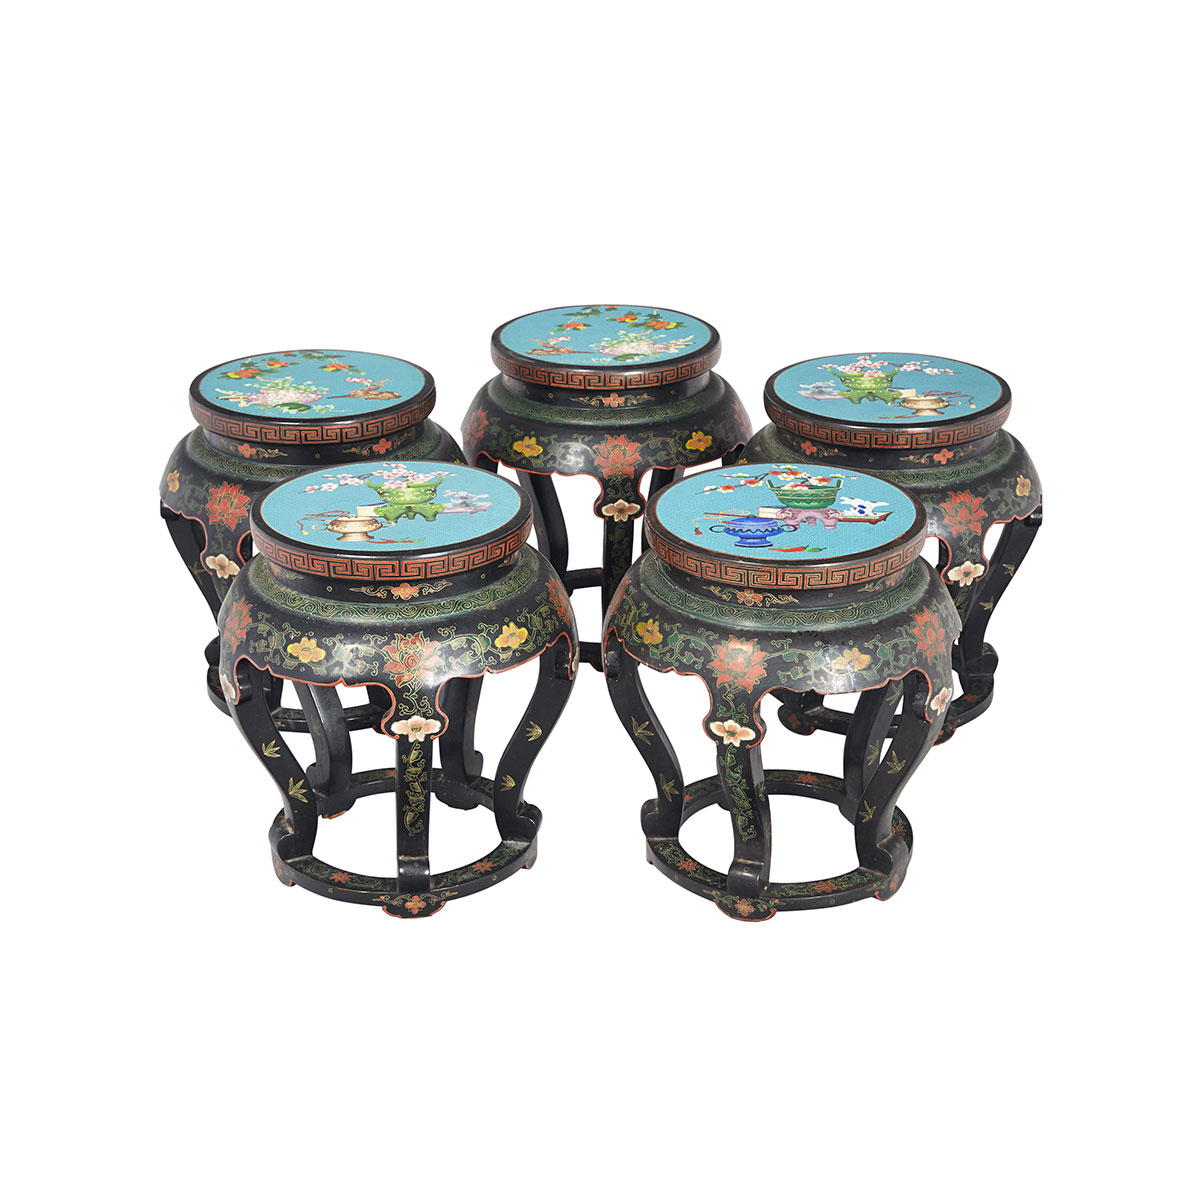 Set of Five Lacquer and Cloisonné Enamel Inlay Drum Stools